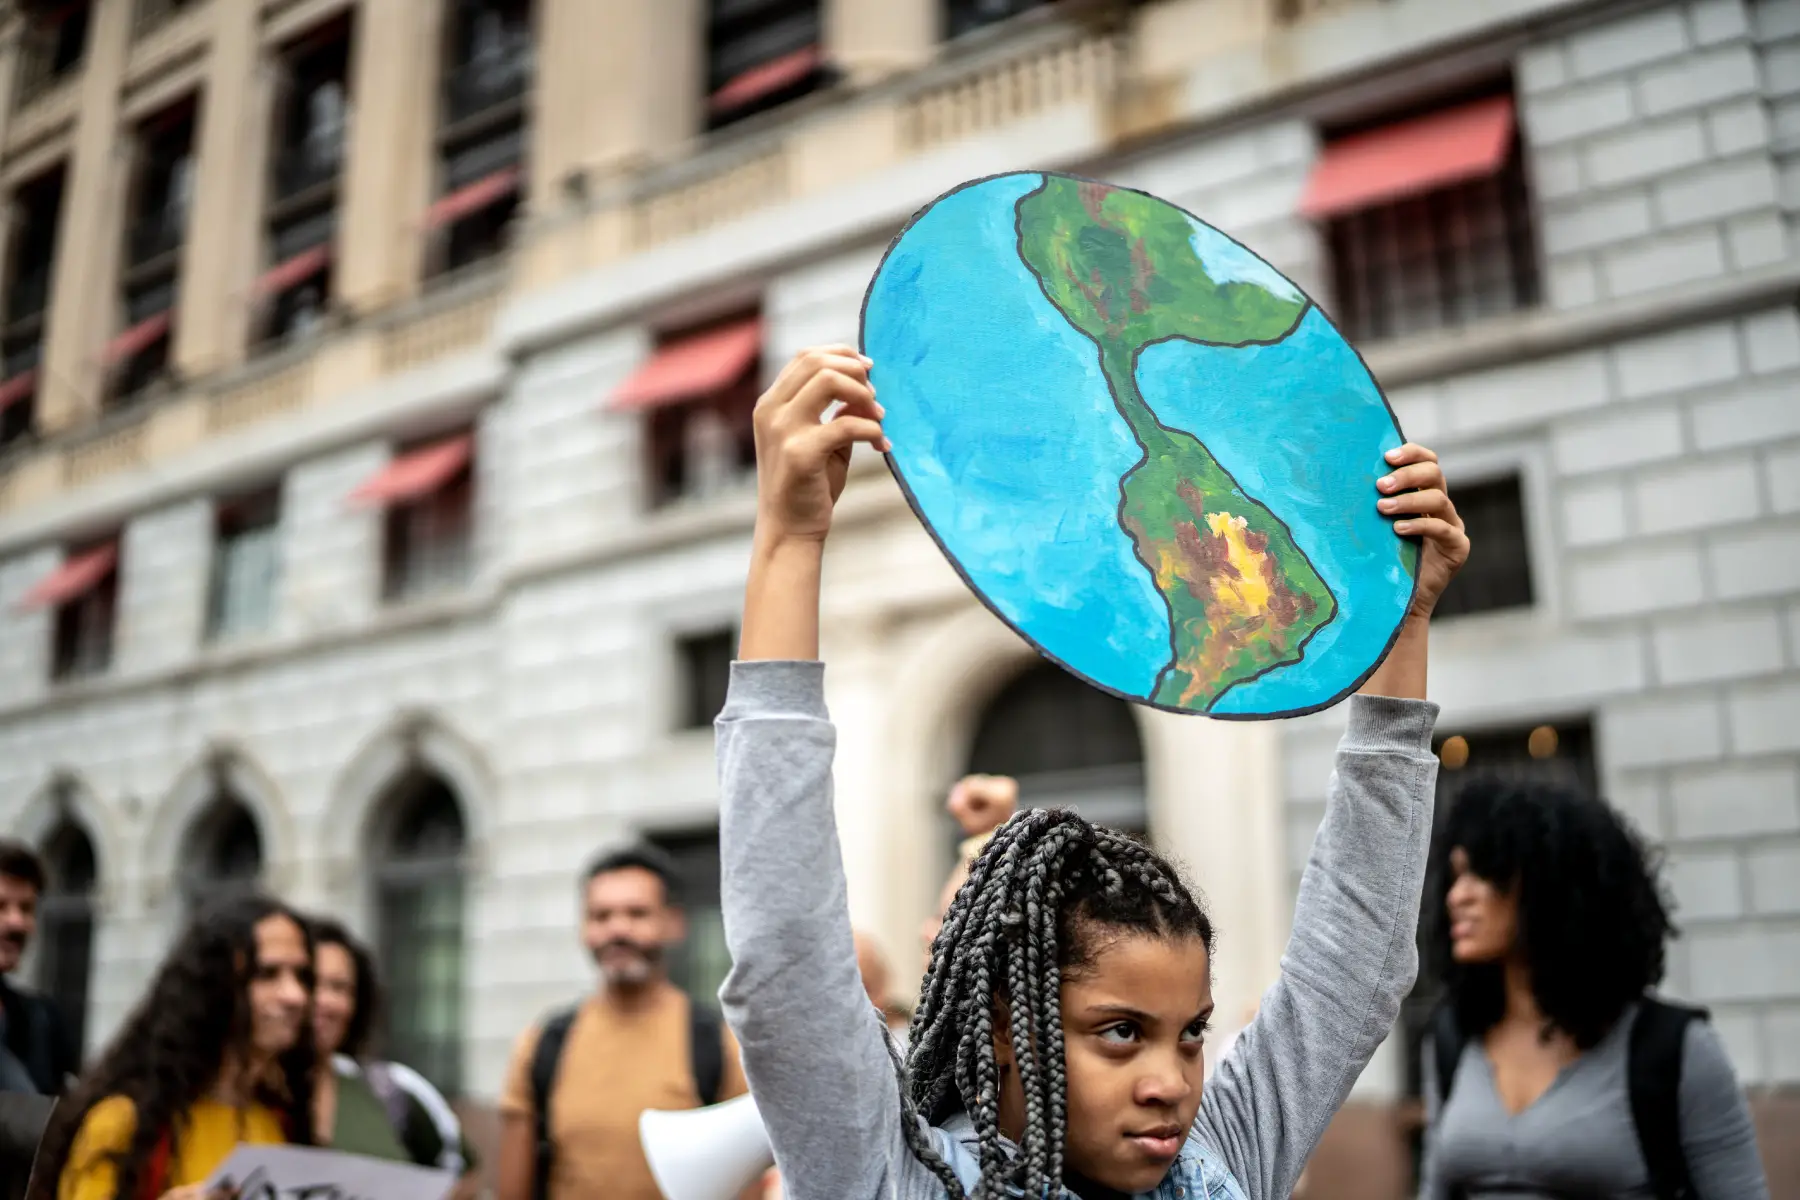 Teen girl at a climate/environmental protest holding a sign in the shape of the earth